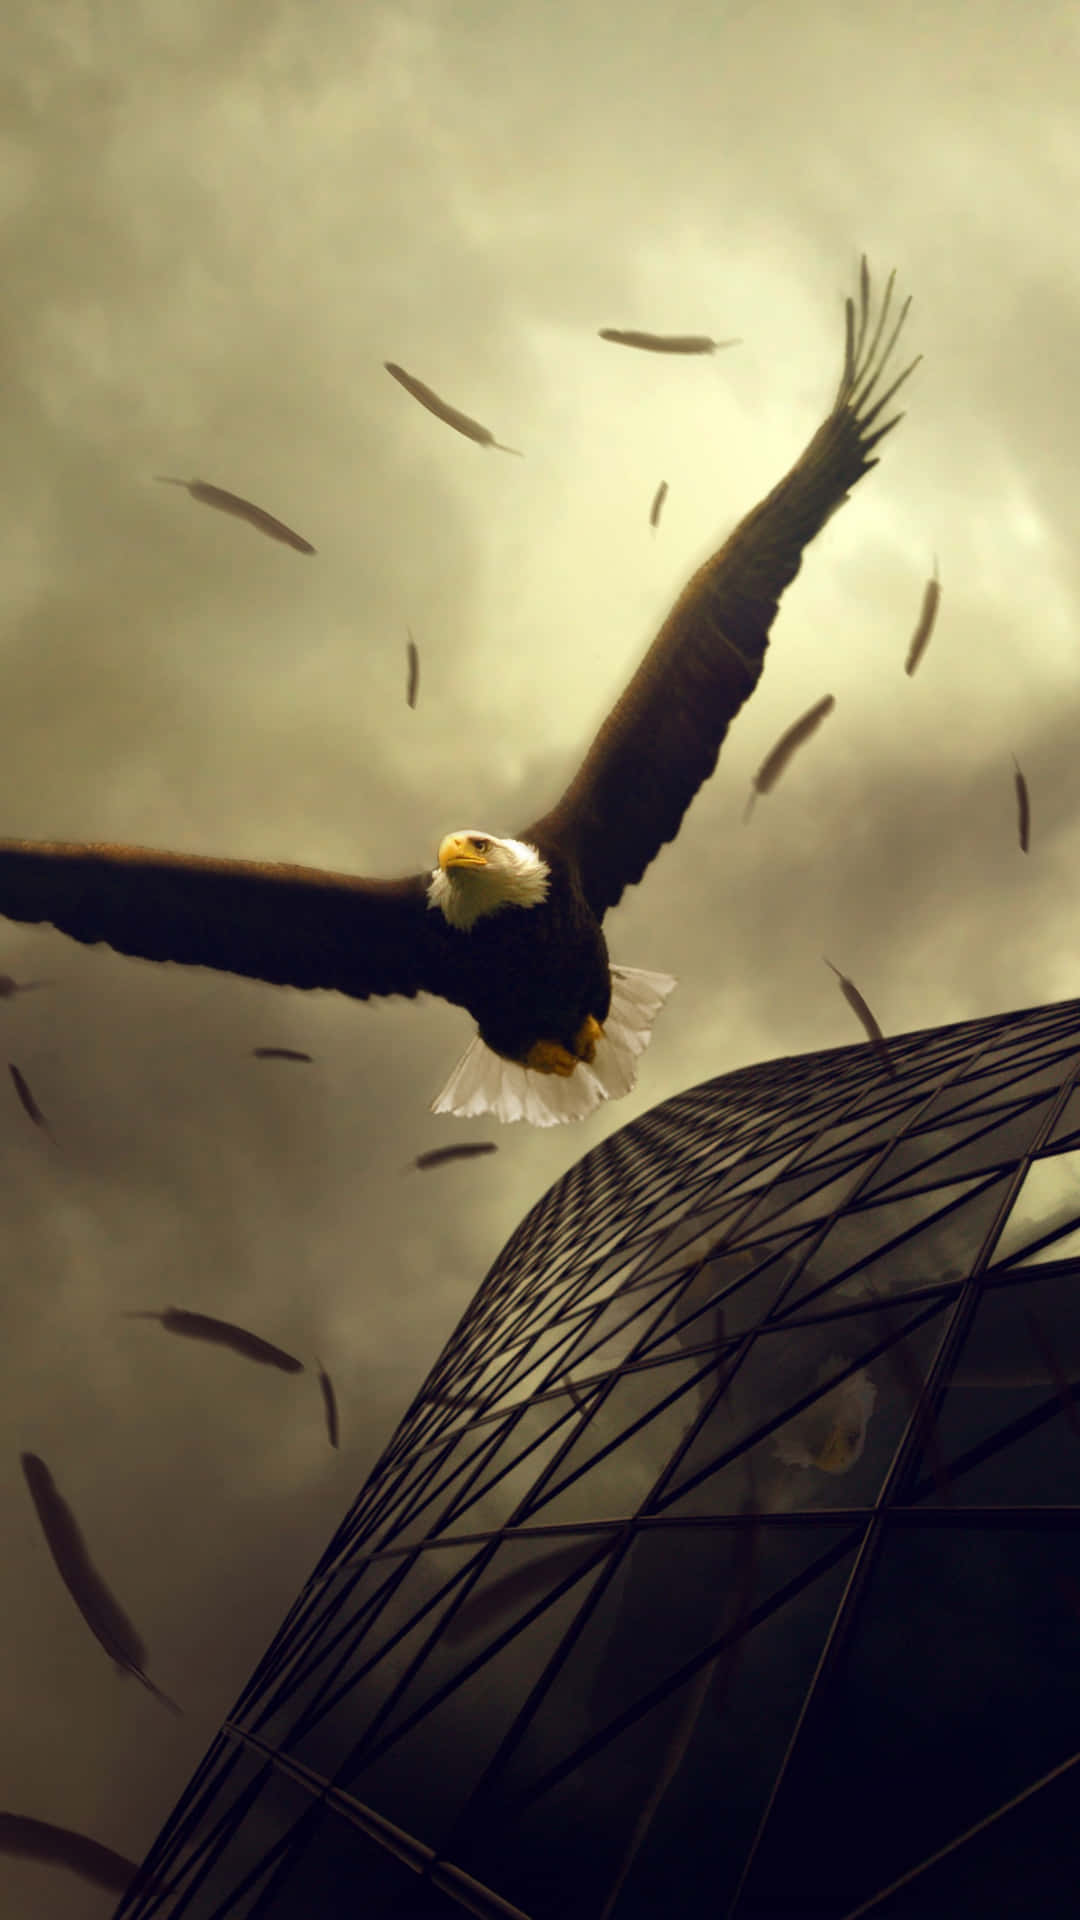 Caption: Majestic Eagle Soaring High in the Sky Wallpaper